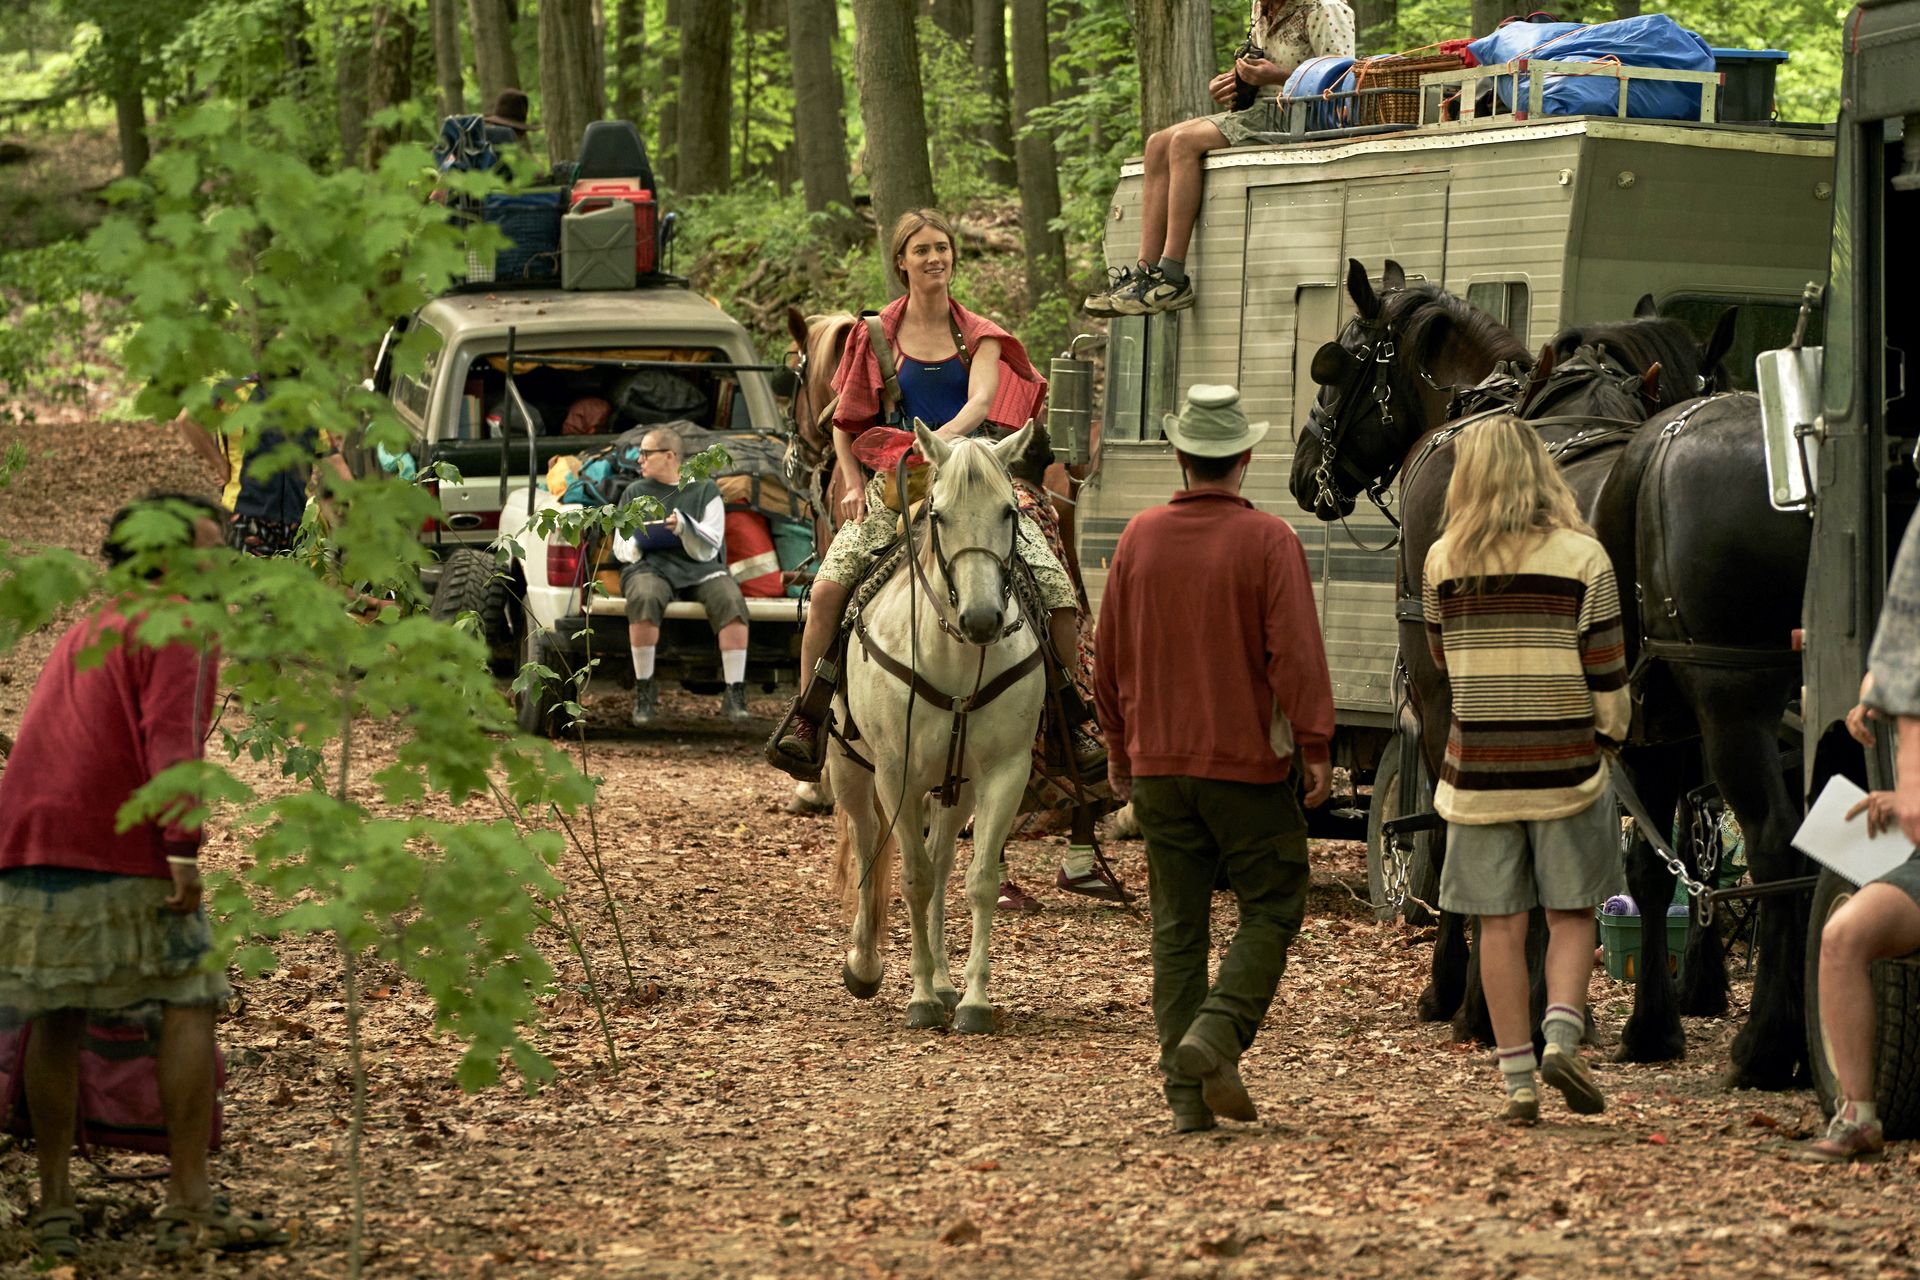 Kirsten (Mackenzie Davis) rides a horse in the woods. There are people walking around her, and in the background there are cars and campers loaded up with bags. 